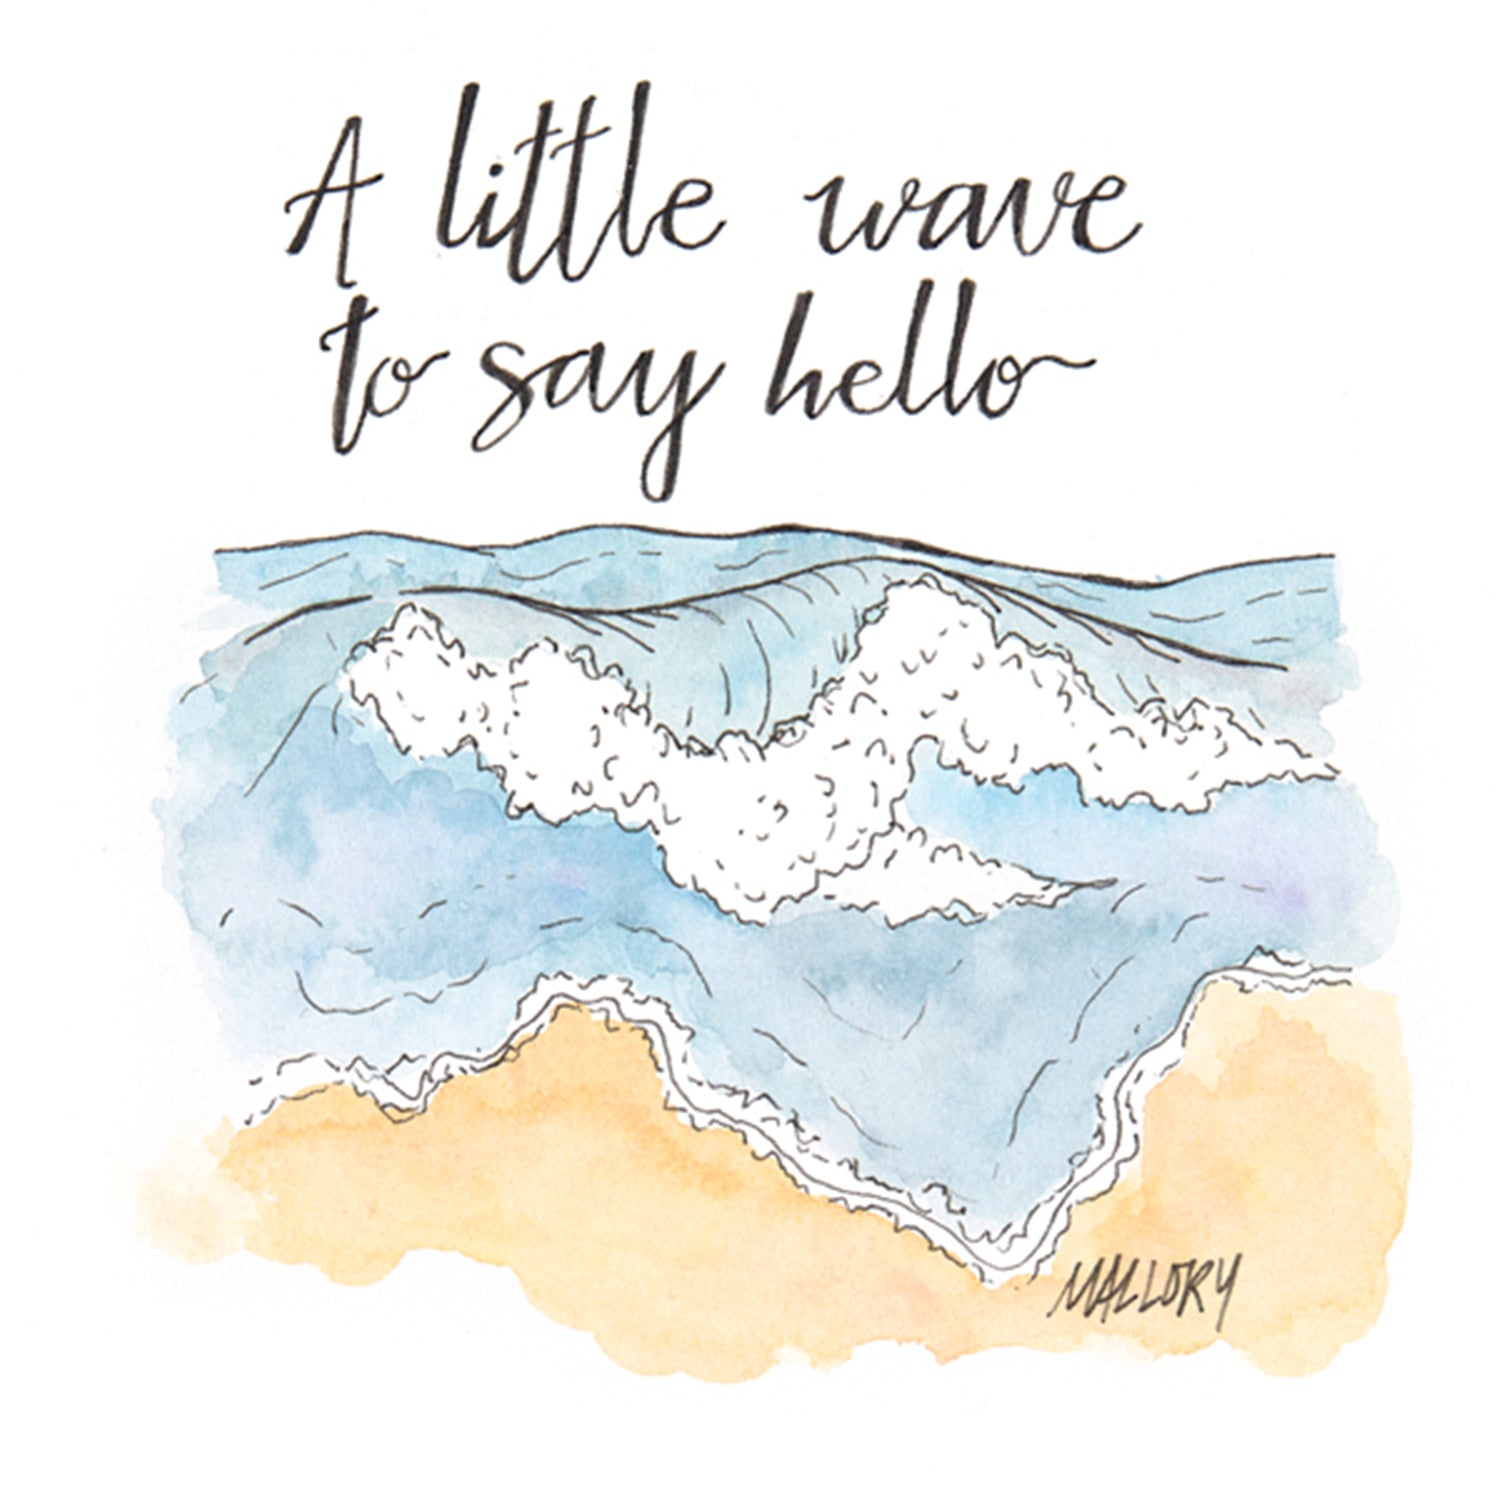 Mockup of an anytime greeting card with a handmade illustration of a wave on a beach. Written on the card is, "A little wave to say hello".